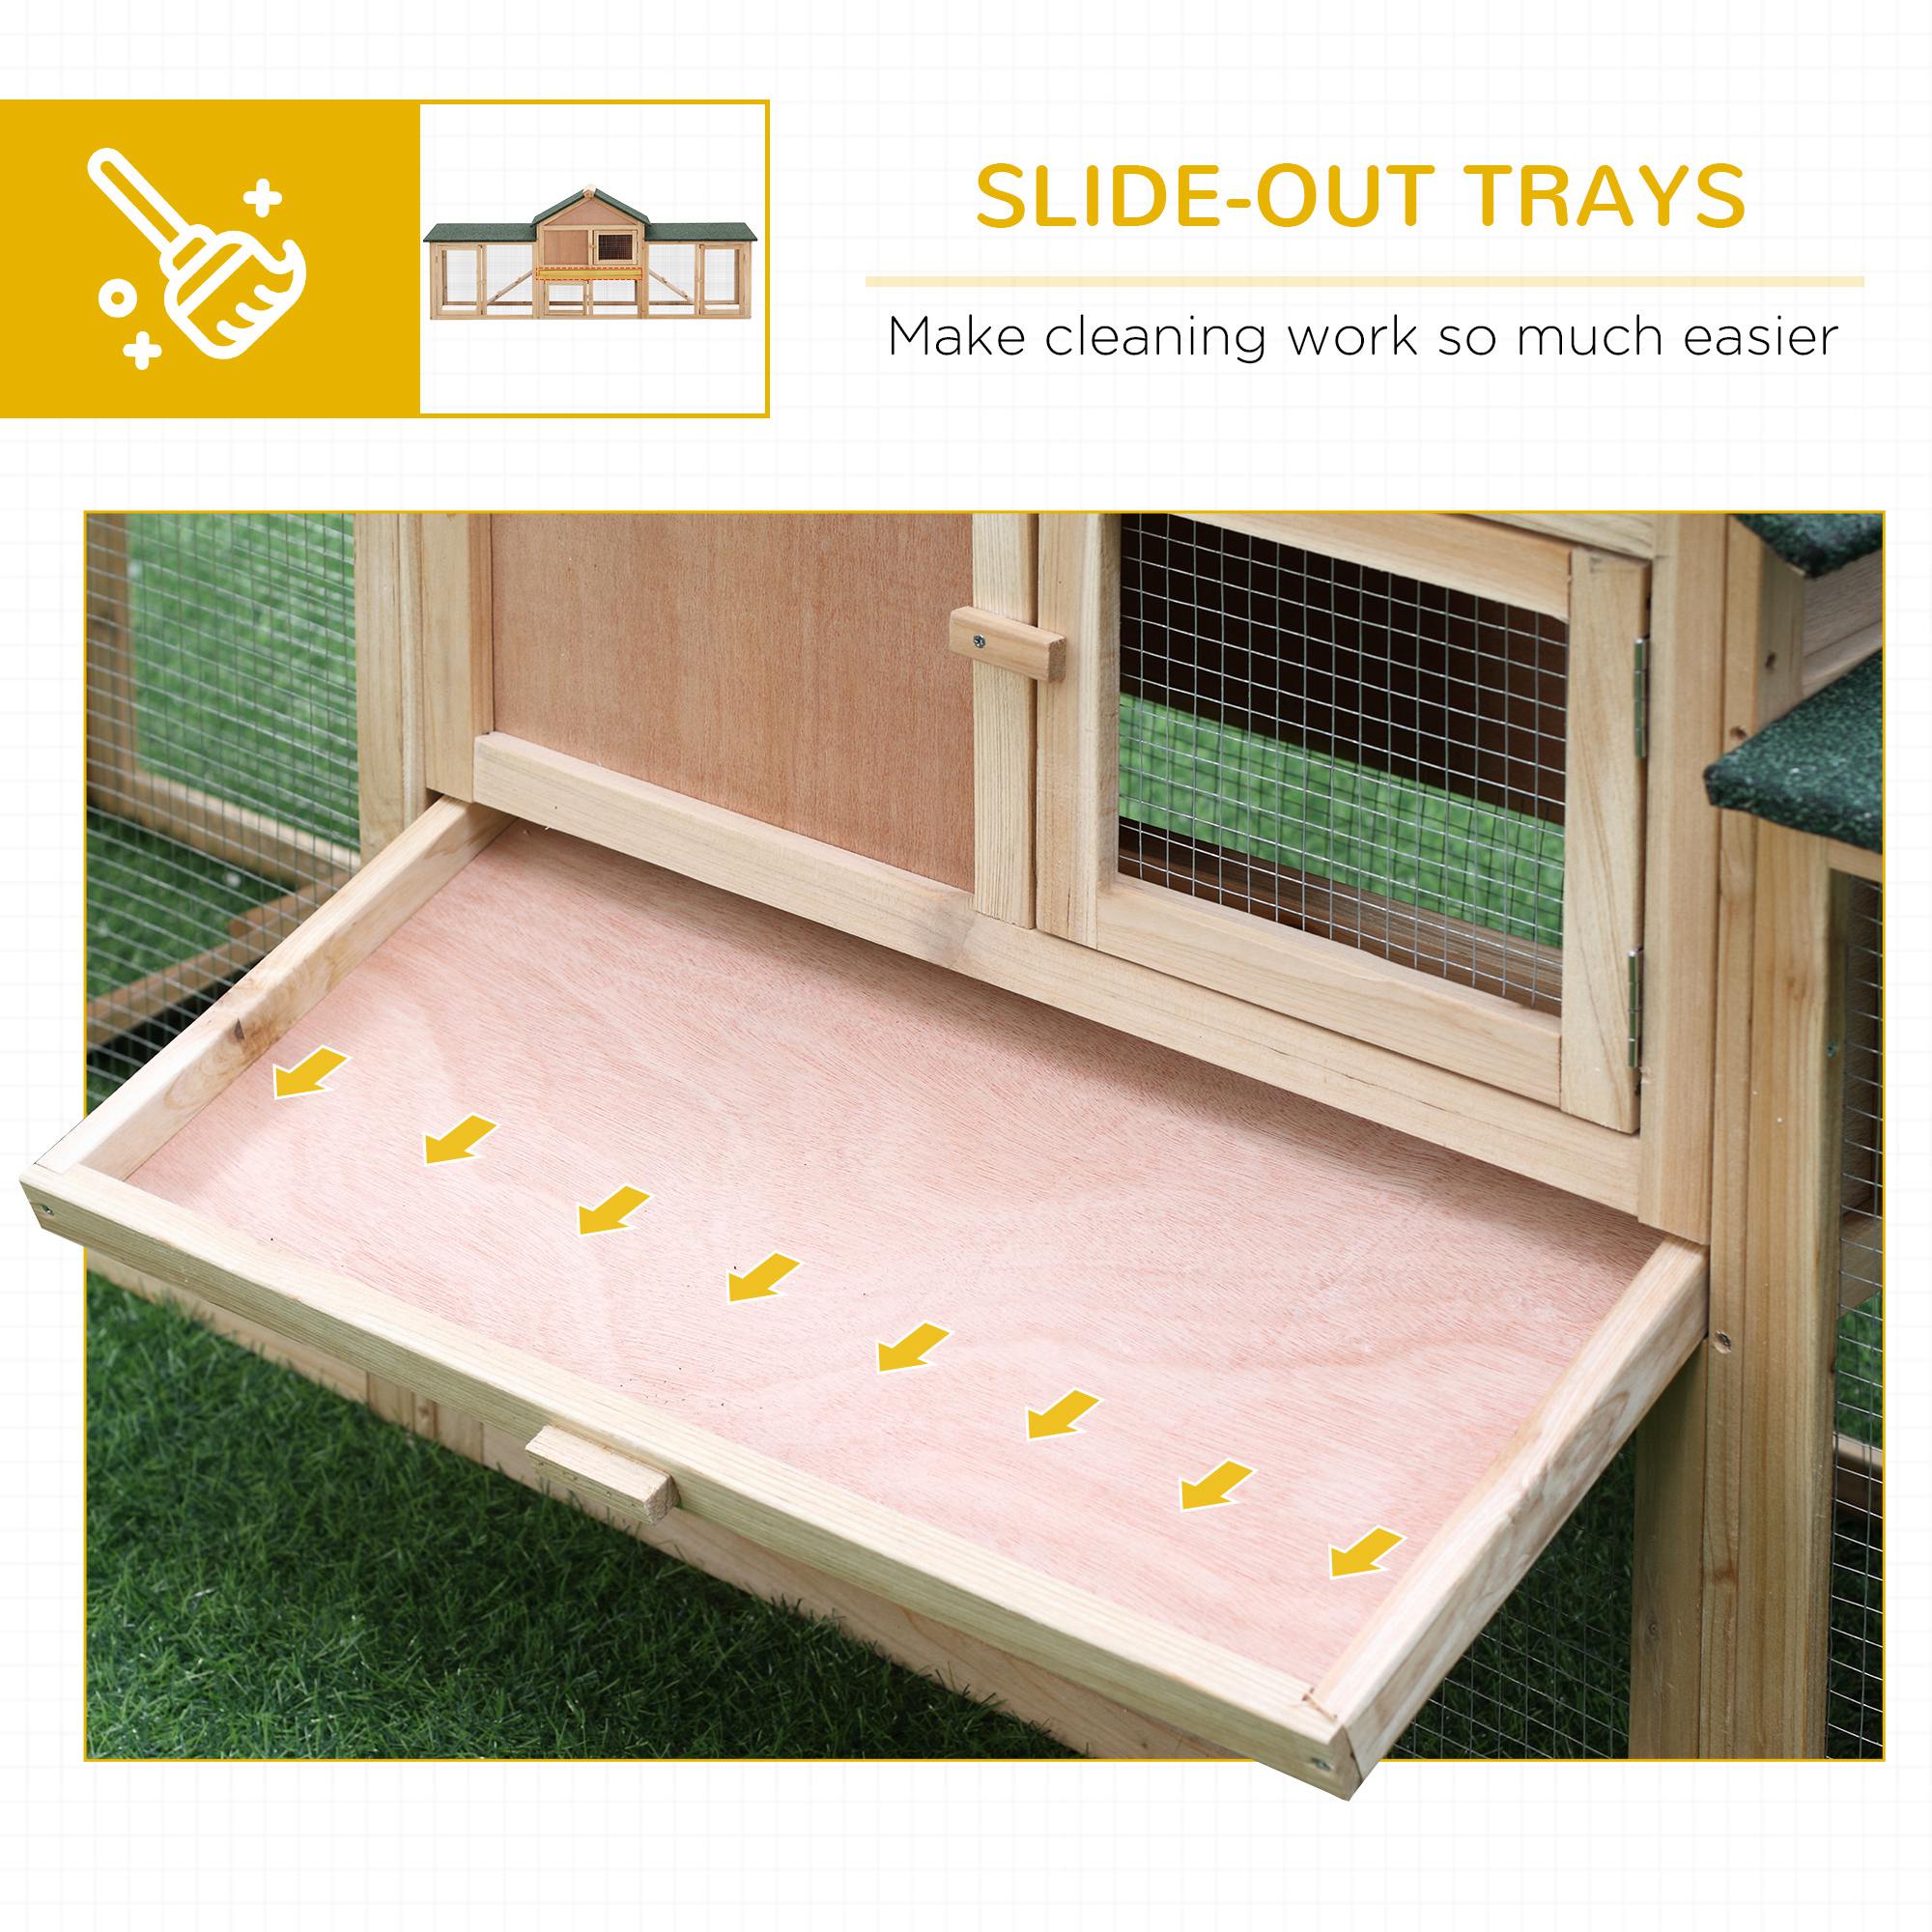 PawHut Deluxe Two-Storey Wooden Bunny Rabbit Hutch, Guinea Pig Hutch, w/ Ladder Outdoor Run Box Slide-out Tray 210 x 45.5 x 84.5 cm - Inspirely